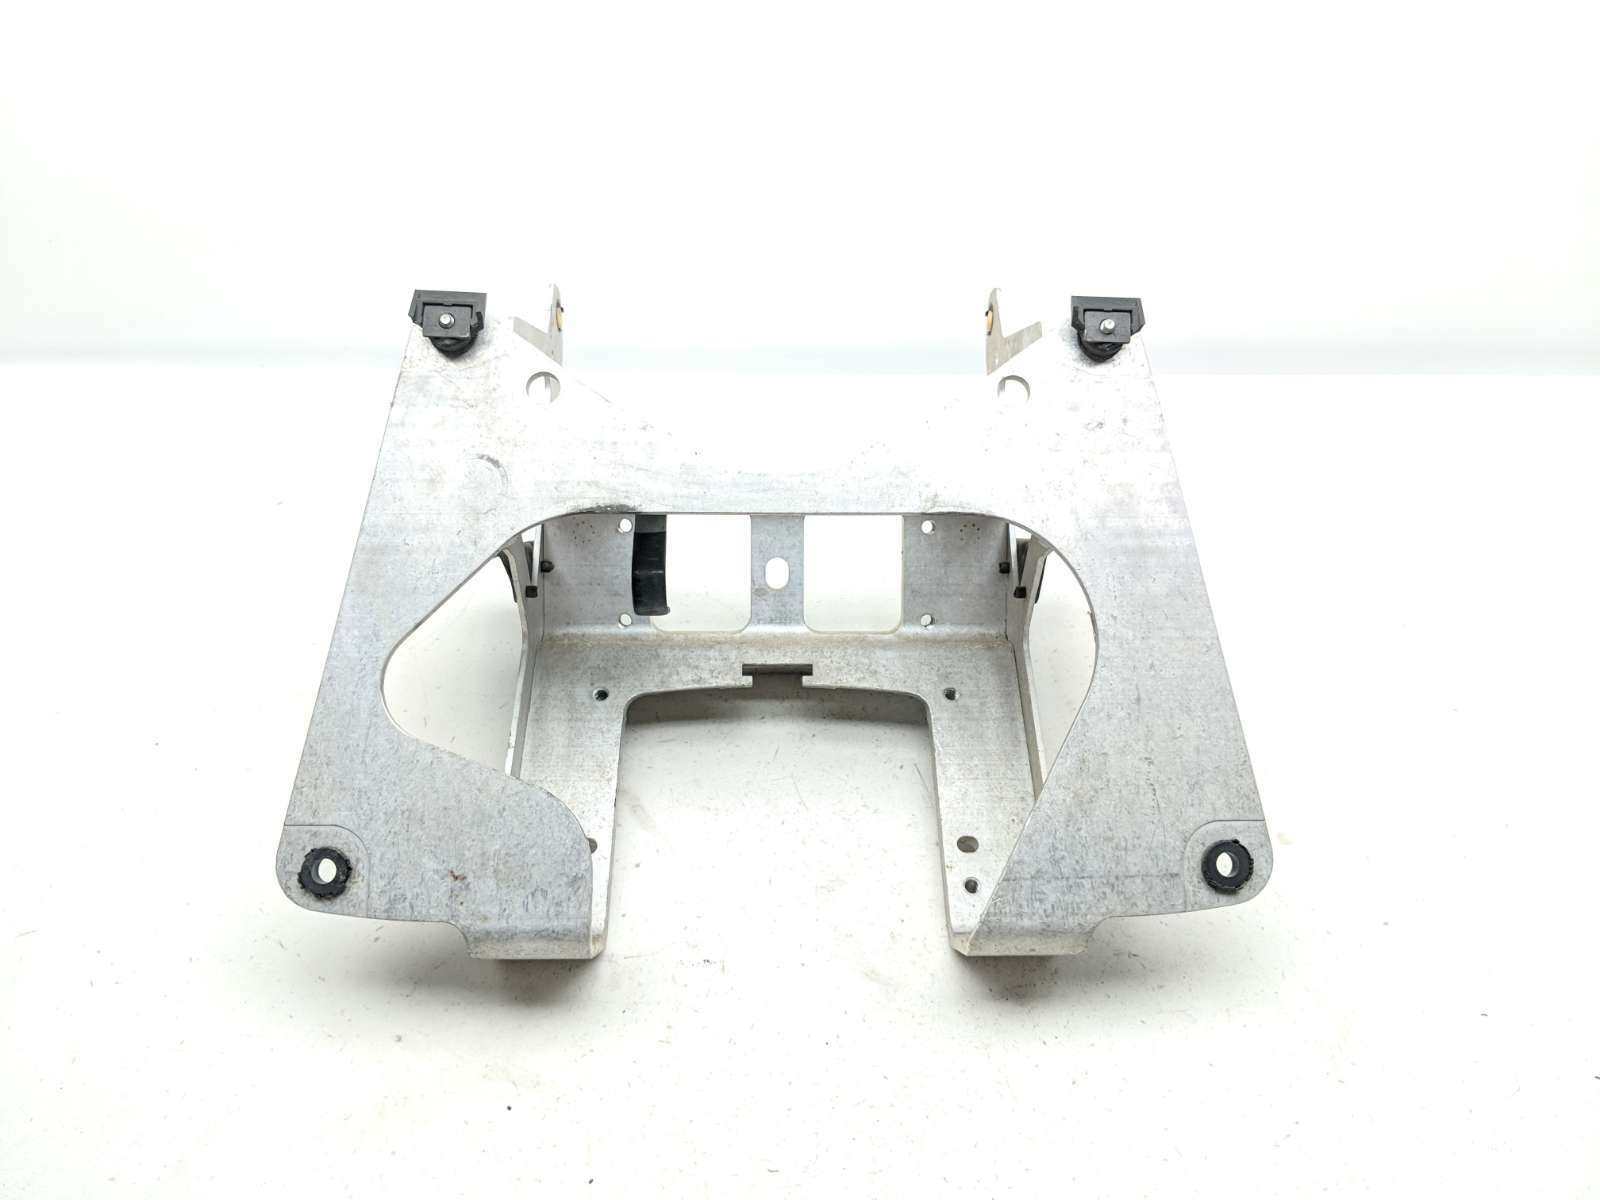 09 Victory Vision Front Fairing Cowling Cowl Cockpit & Headlight Bracket